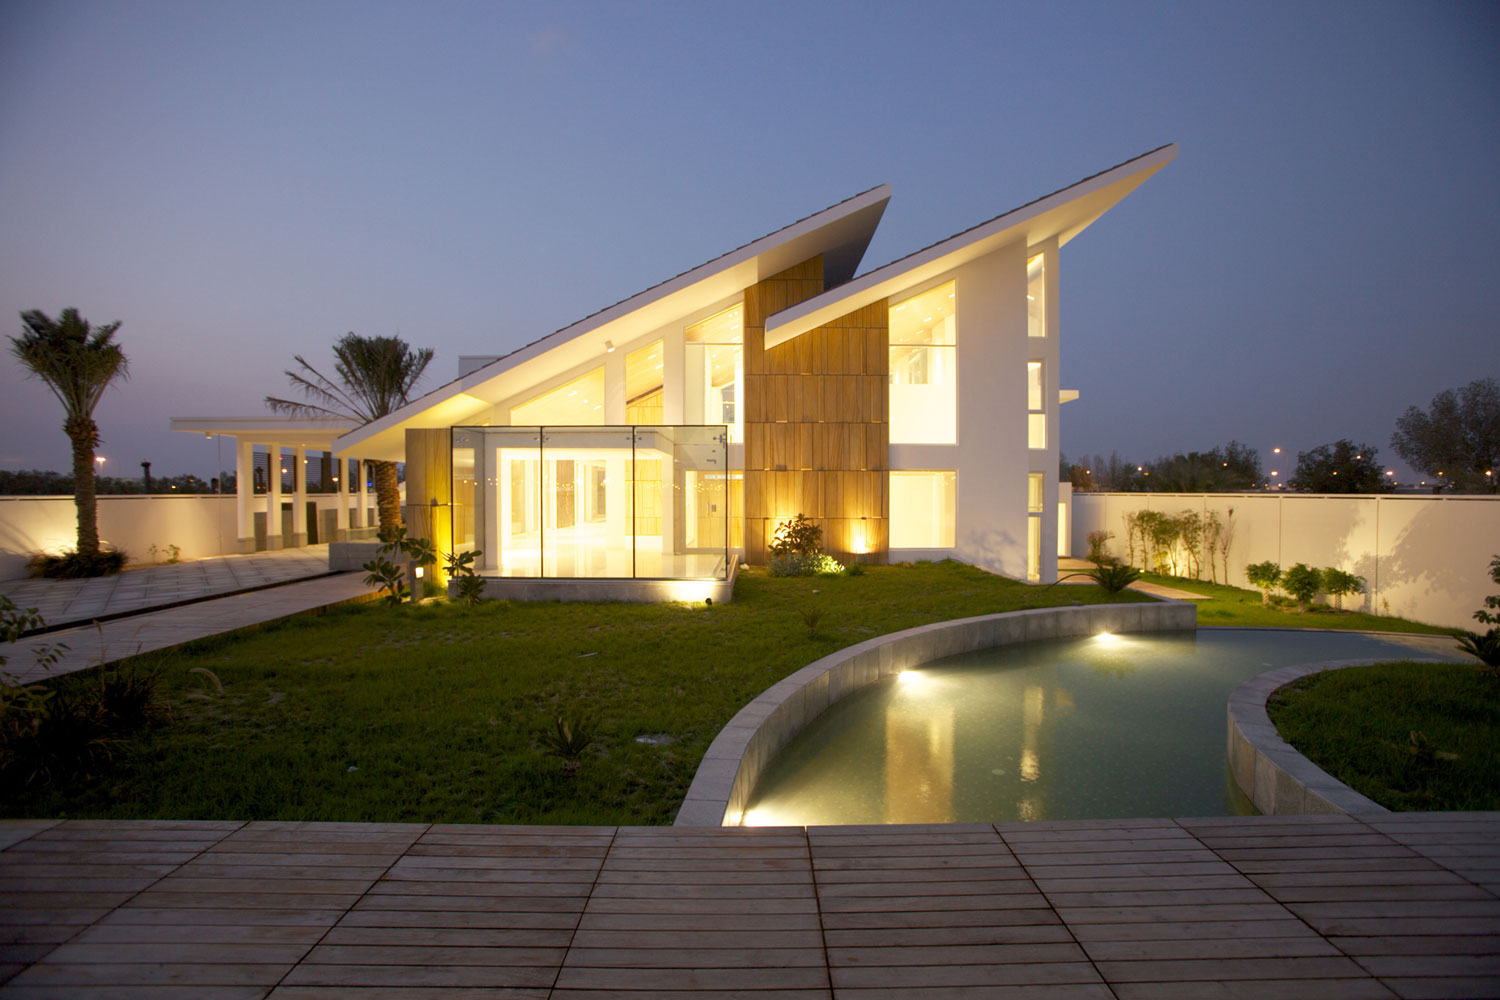 side-modern-house-with-white-exterior-color-and-sloping-roof-design-and-outdoor-pool-lighting-ideas